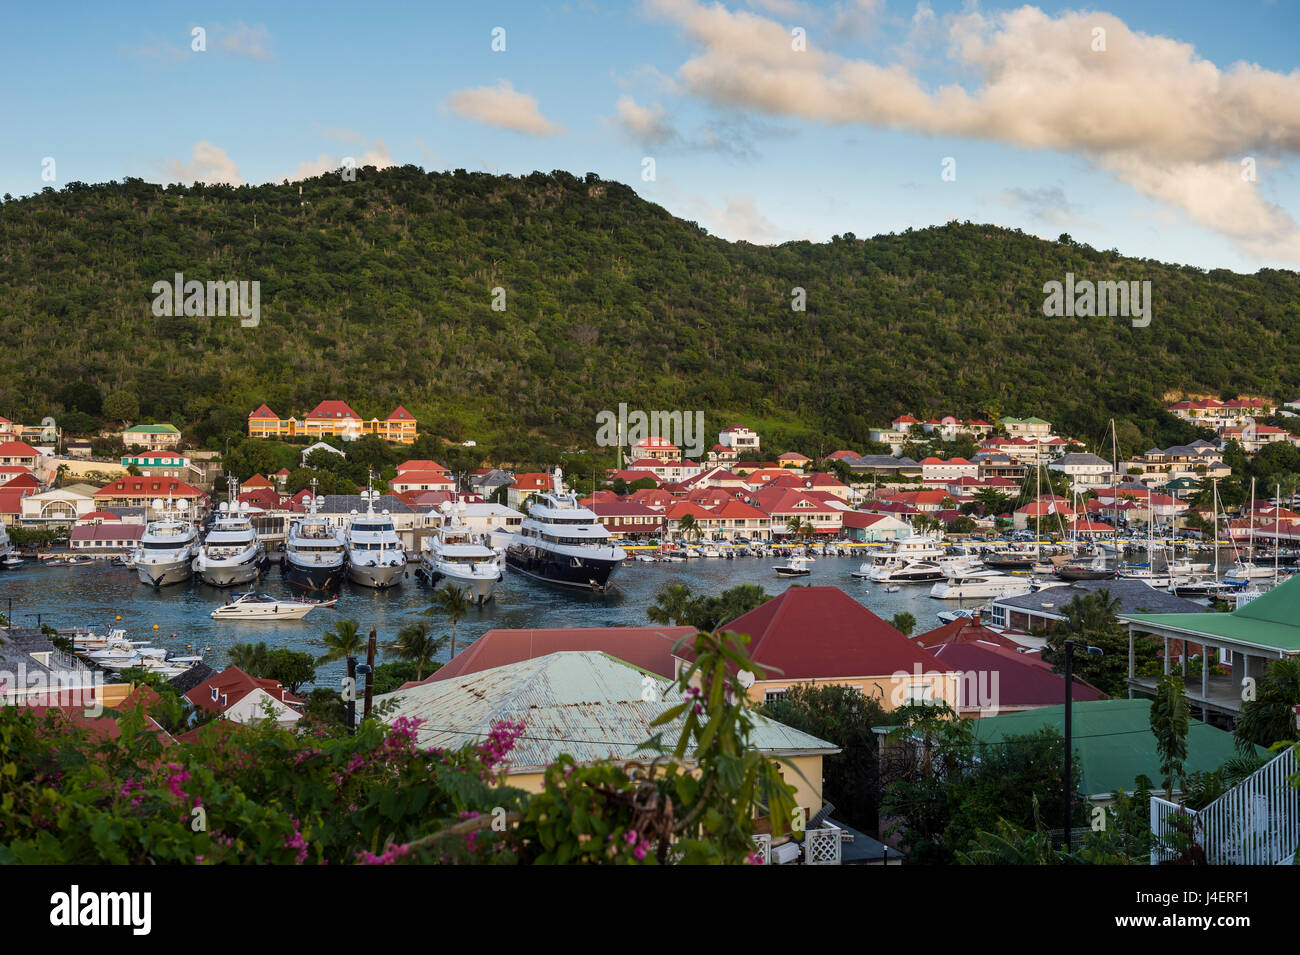 Luxury yachts, in the harbour of Gustavia, St. Barth (Saint Barthelemy), Lesser Antilles, West Indies, Caribbean Stock Photo